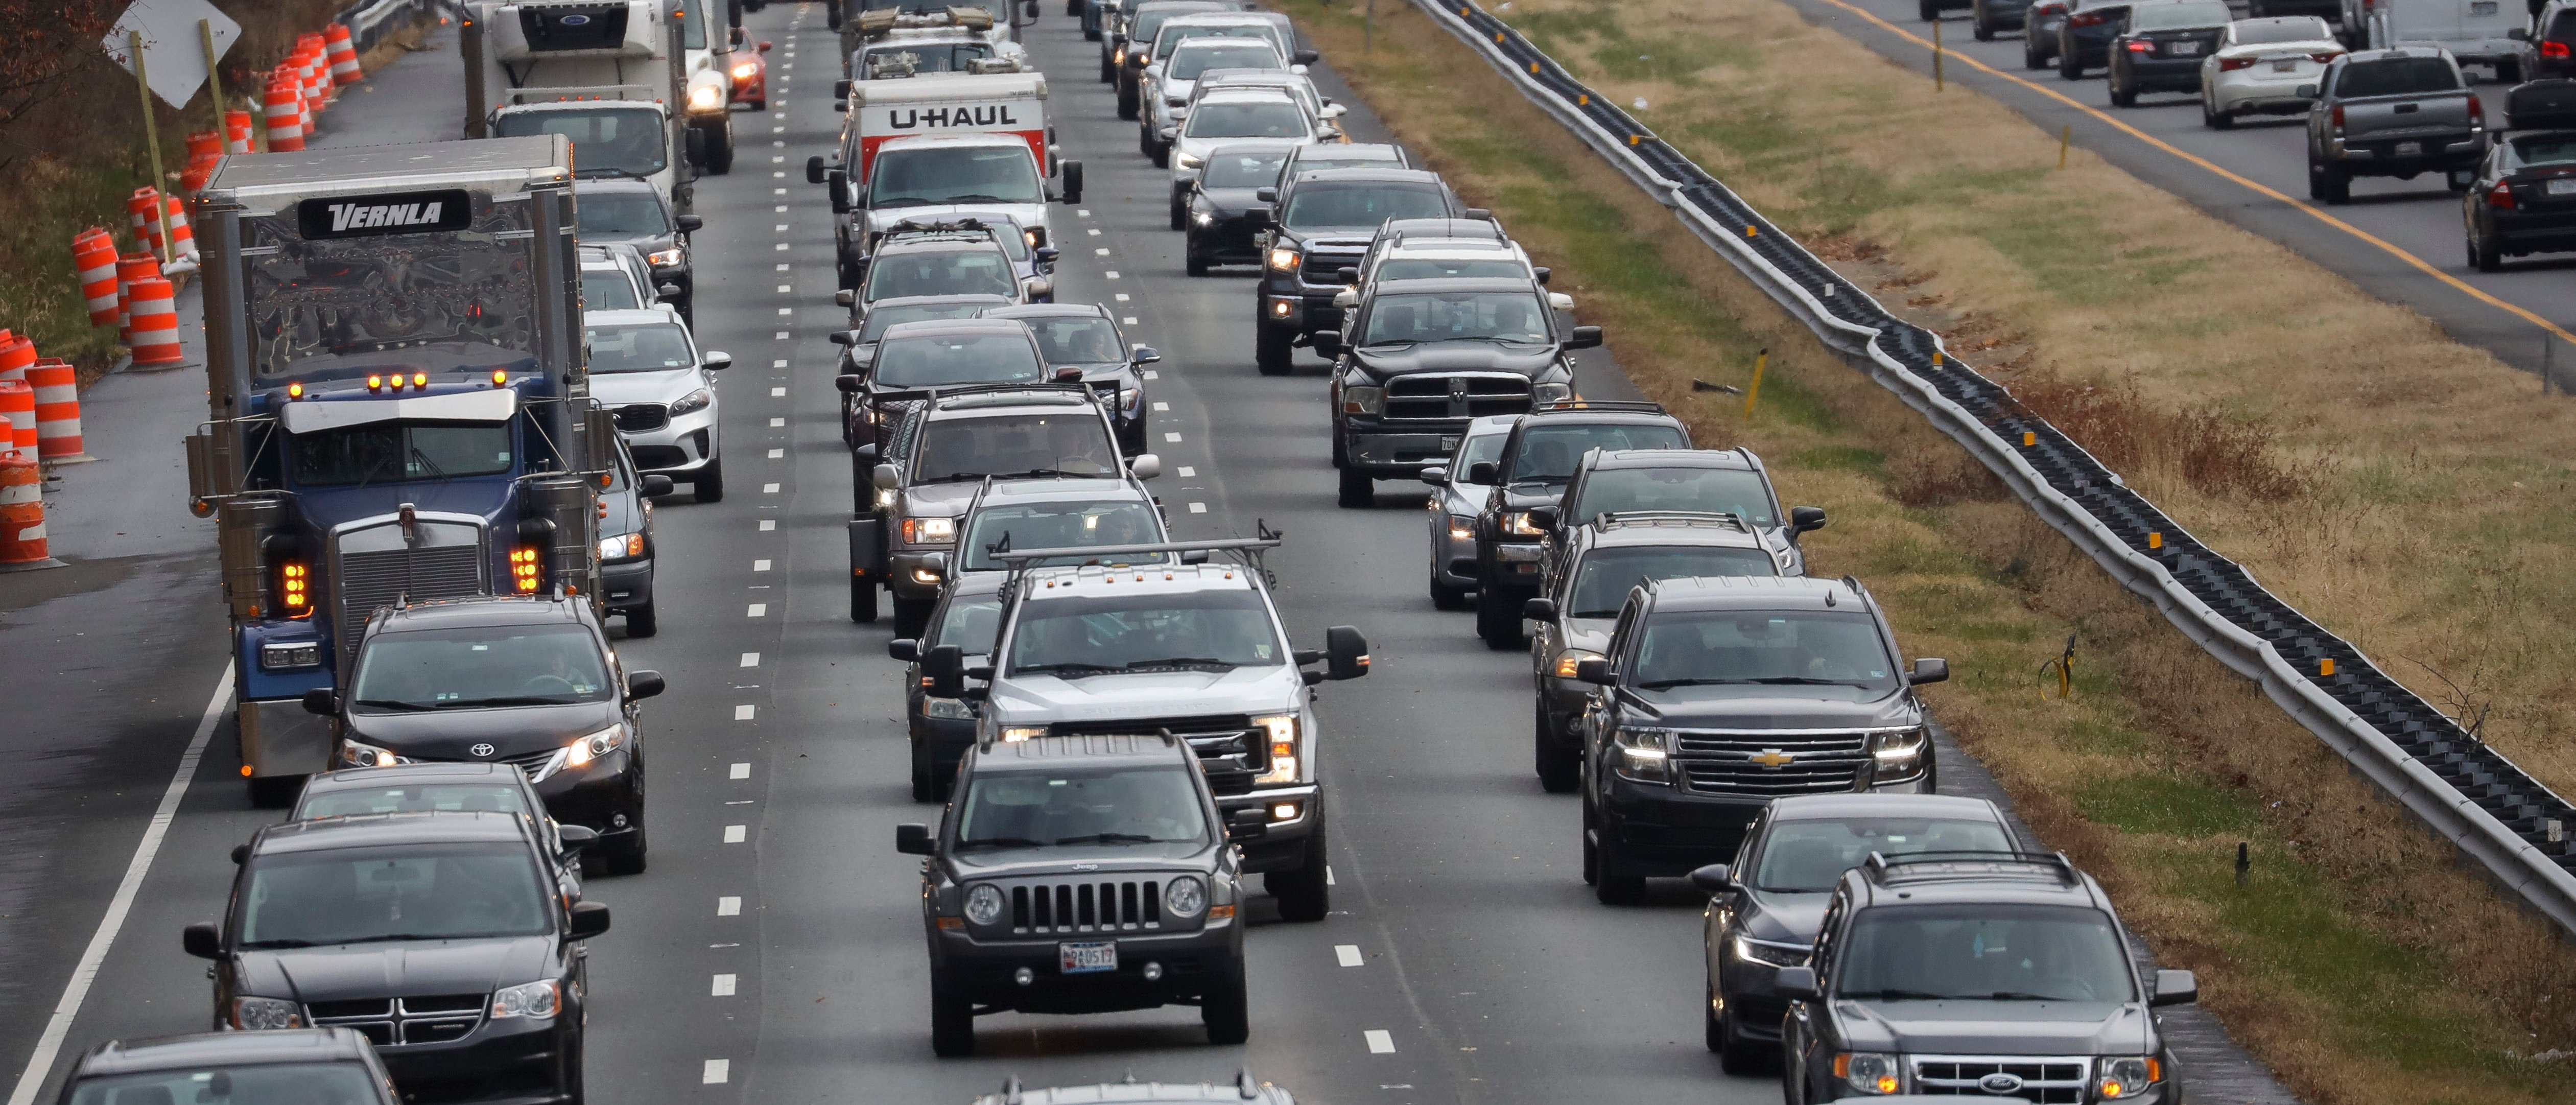 Heavy traffic moves slowly on I-495 (Capital Beltway) the day before Thanksgiving November 27, 2019 in Bethesda, Maryland. (Drew Angerer/Getty Images)